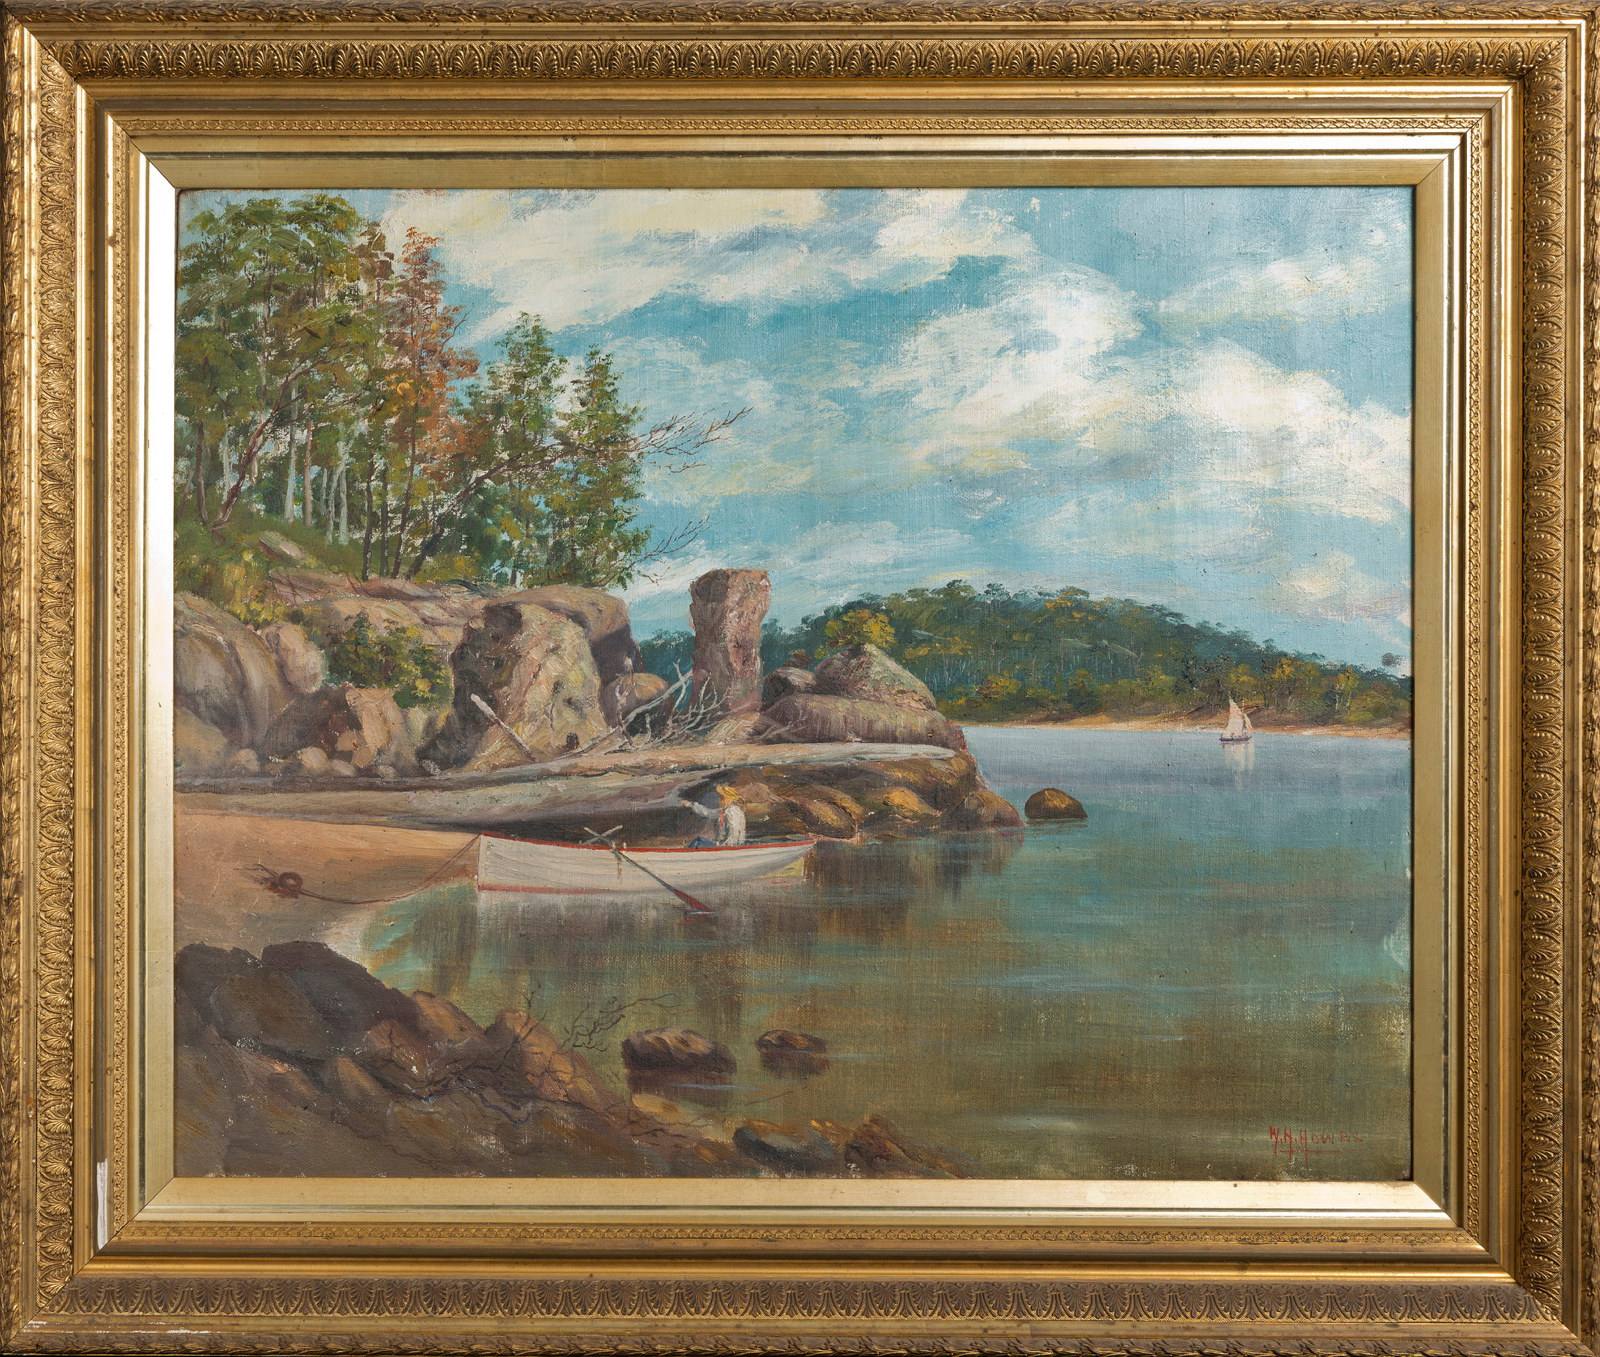 Oil painting of the Shoalhaven River by W. H. Howes, circa 1880s-1890s